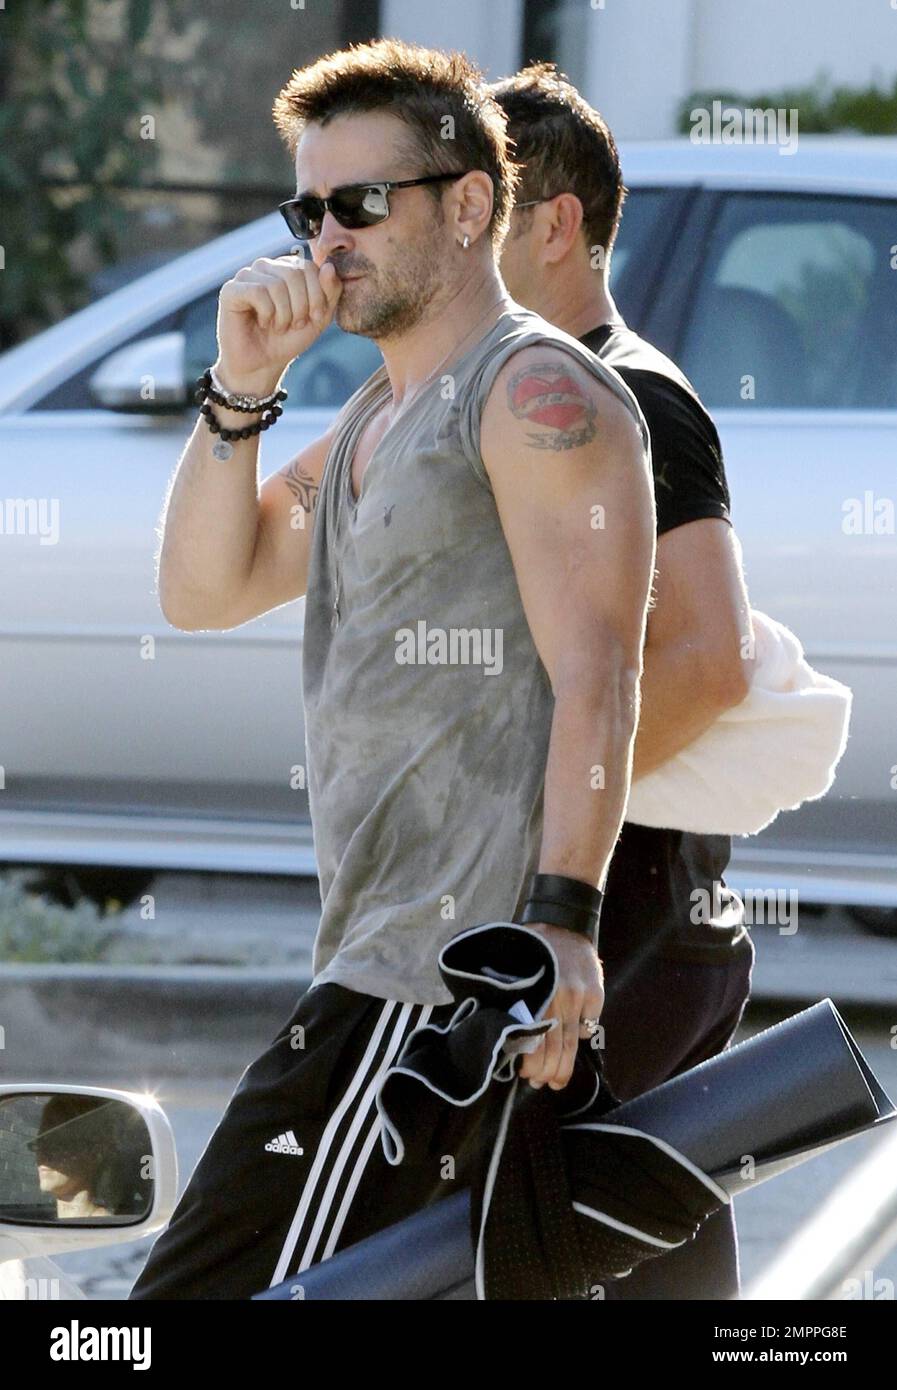 Colin Farrell sets temperatures soaring as he cools down by going topless   Ghanammacom